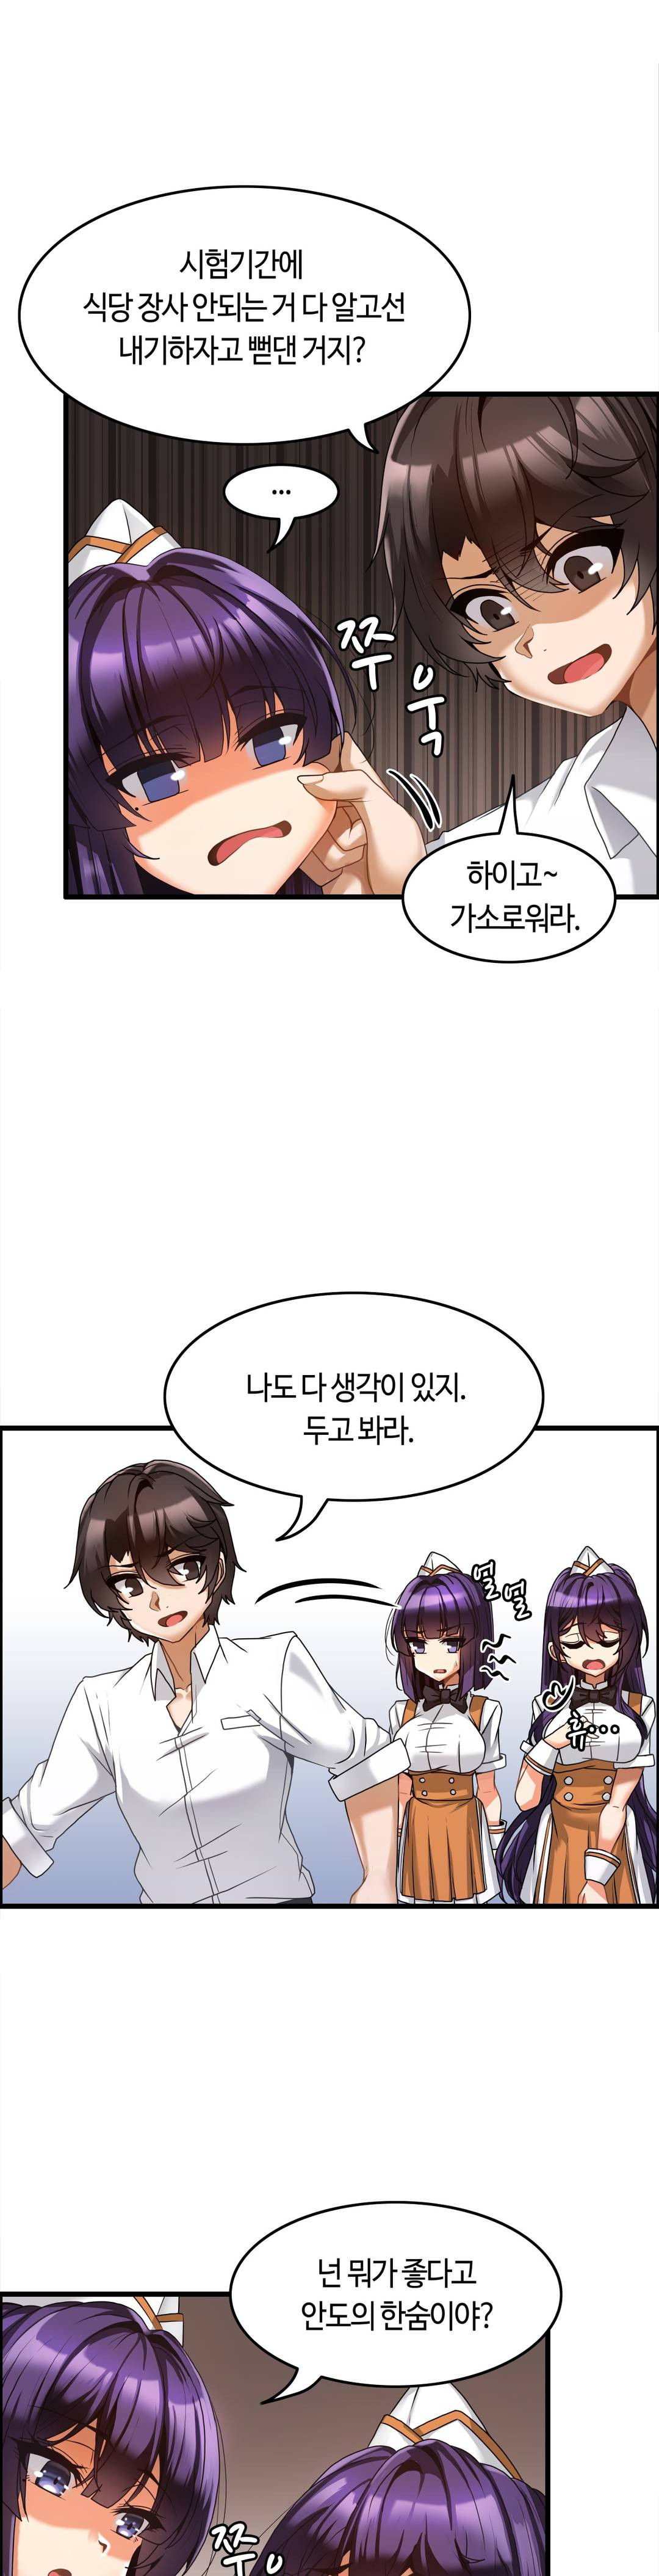 Twins Recipe Raw - Chapter 6 Page 6